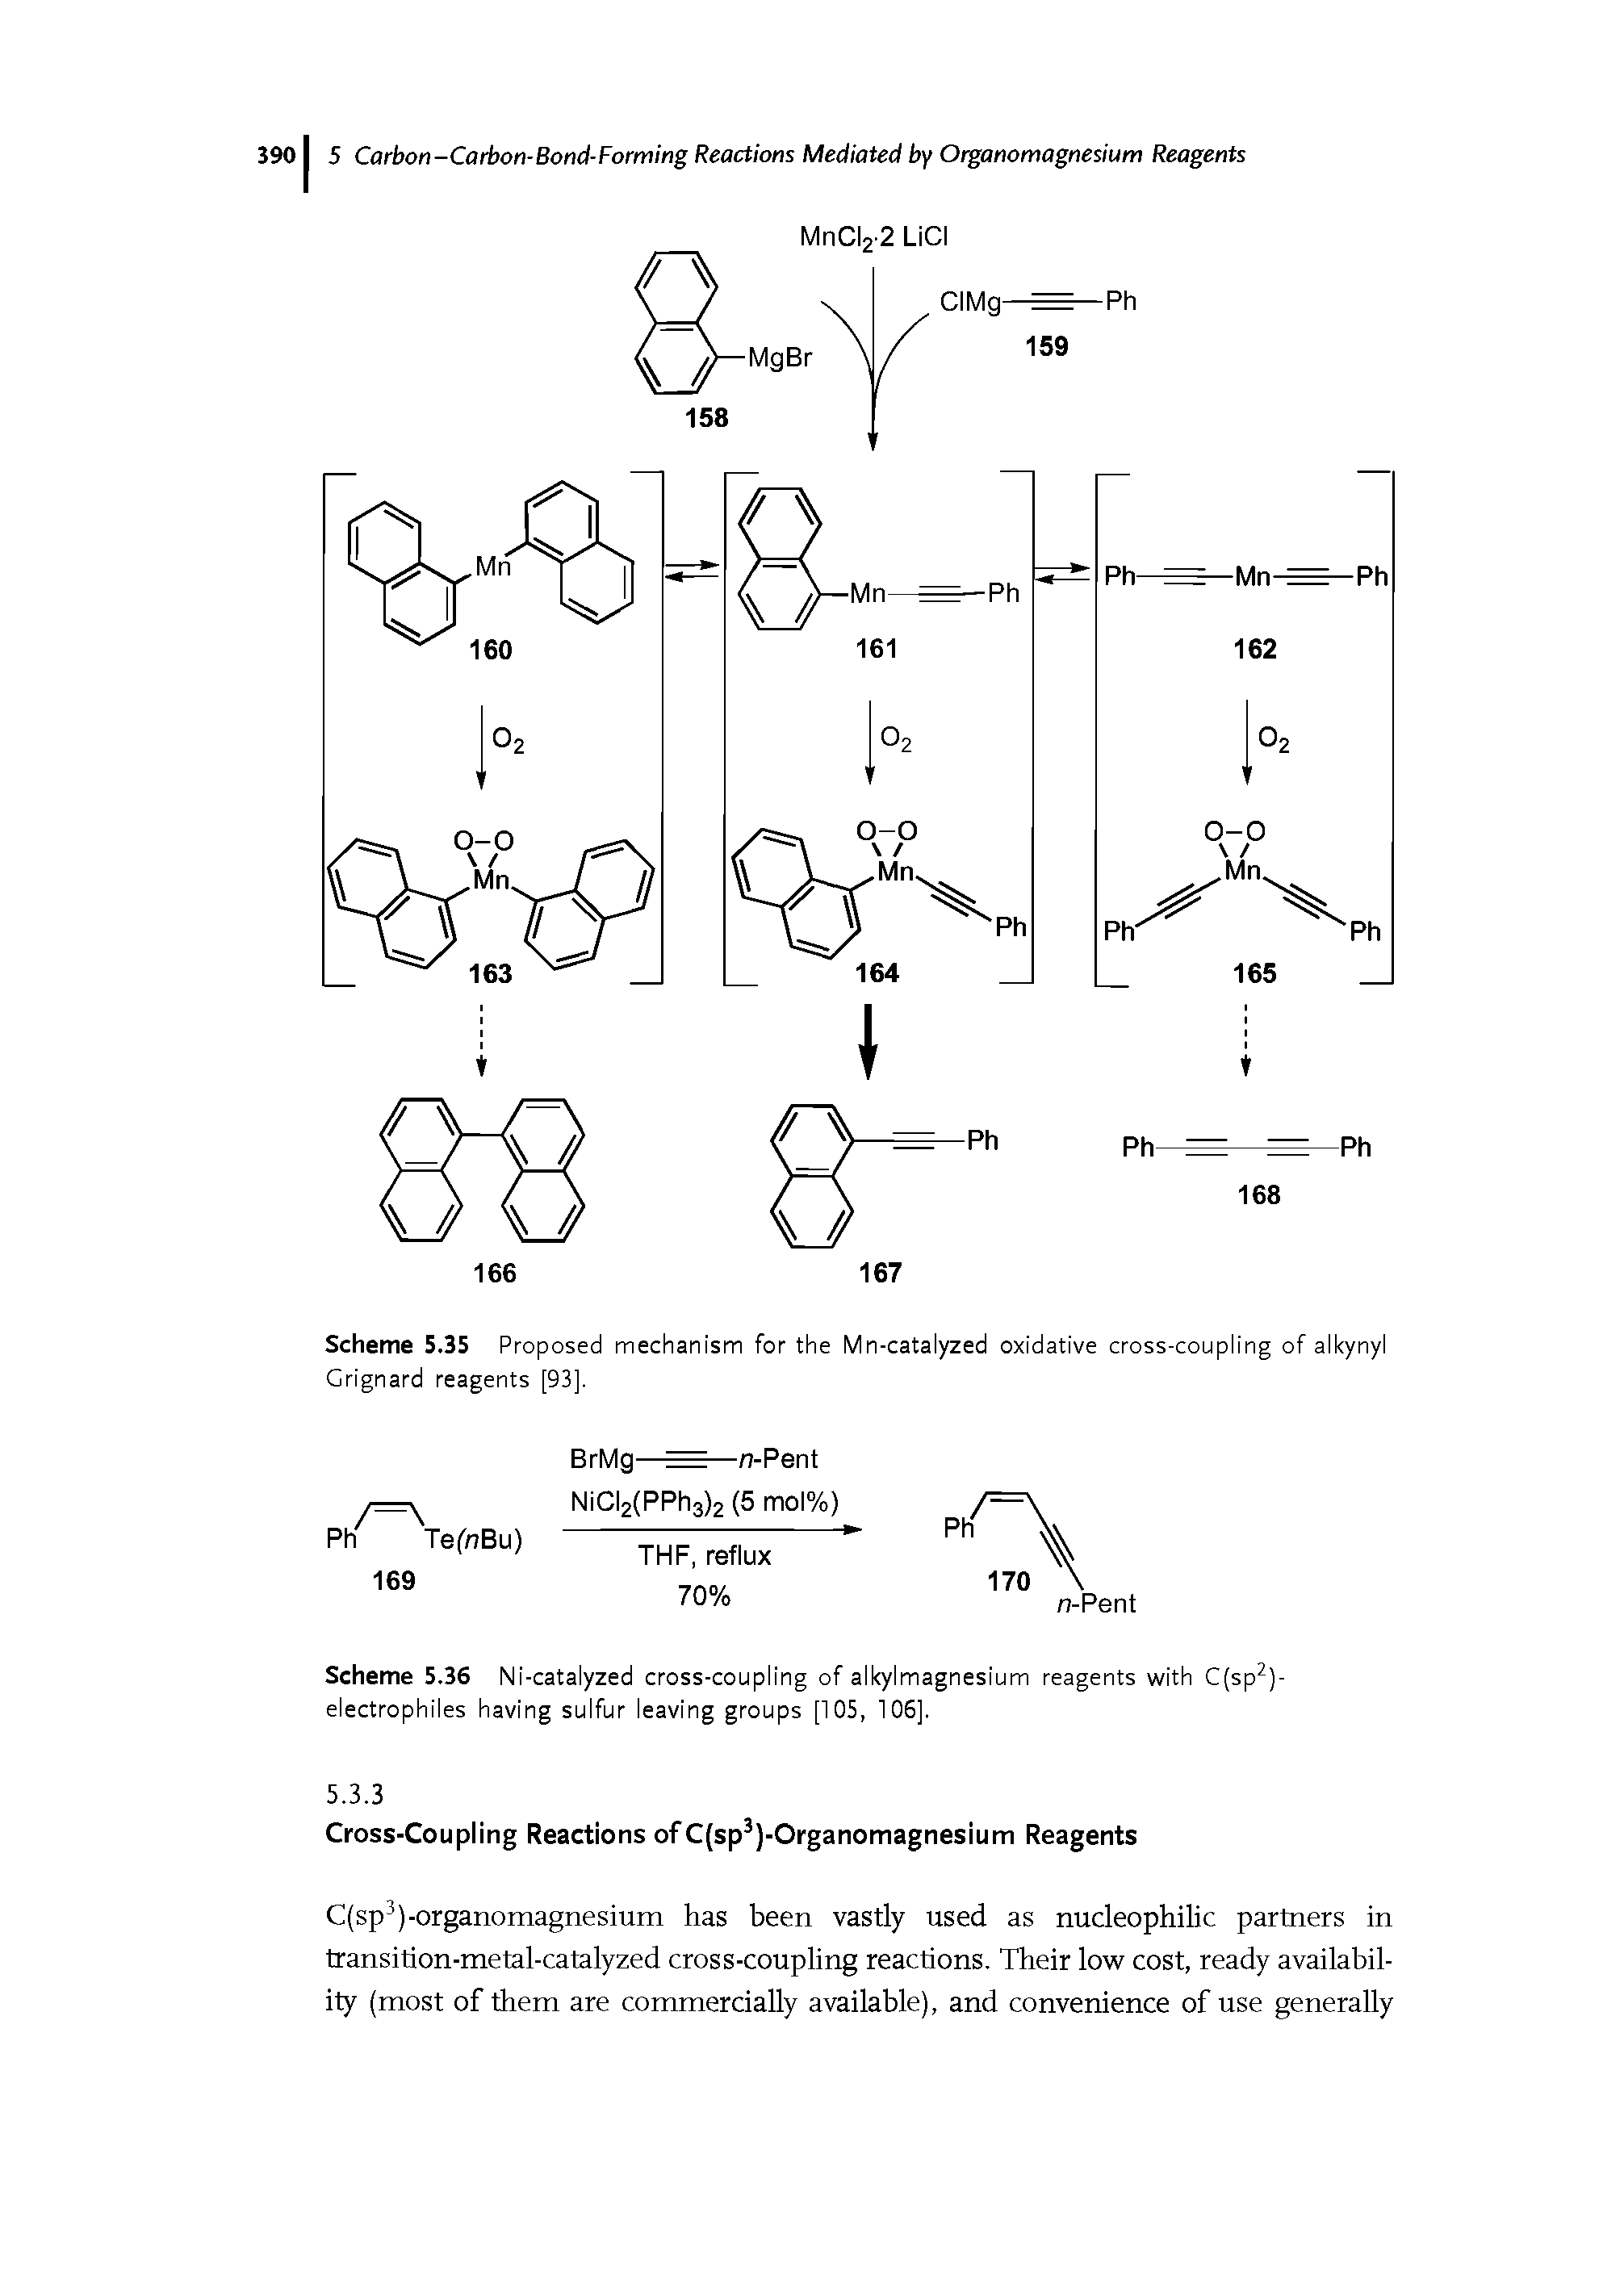 Scheme 5.36 Ni-catalyzed cross-coupling of alkylmagnesium reagents with C(sp )-electrophiles having sulfur leaving groups [105, 105].